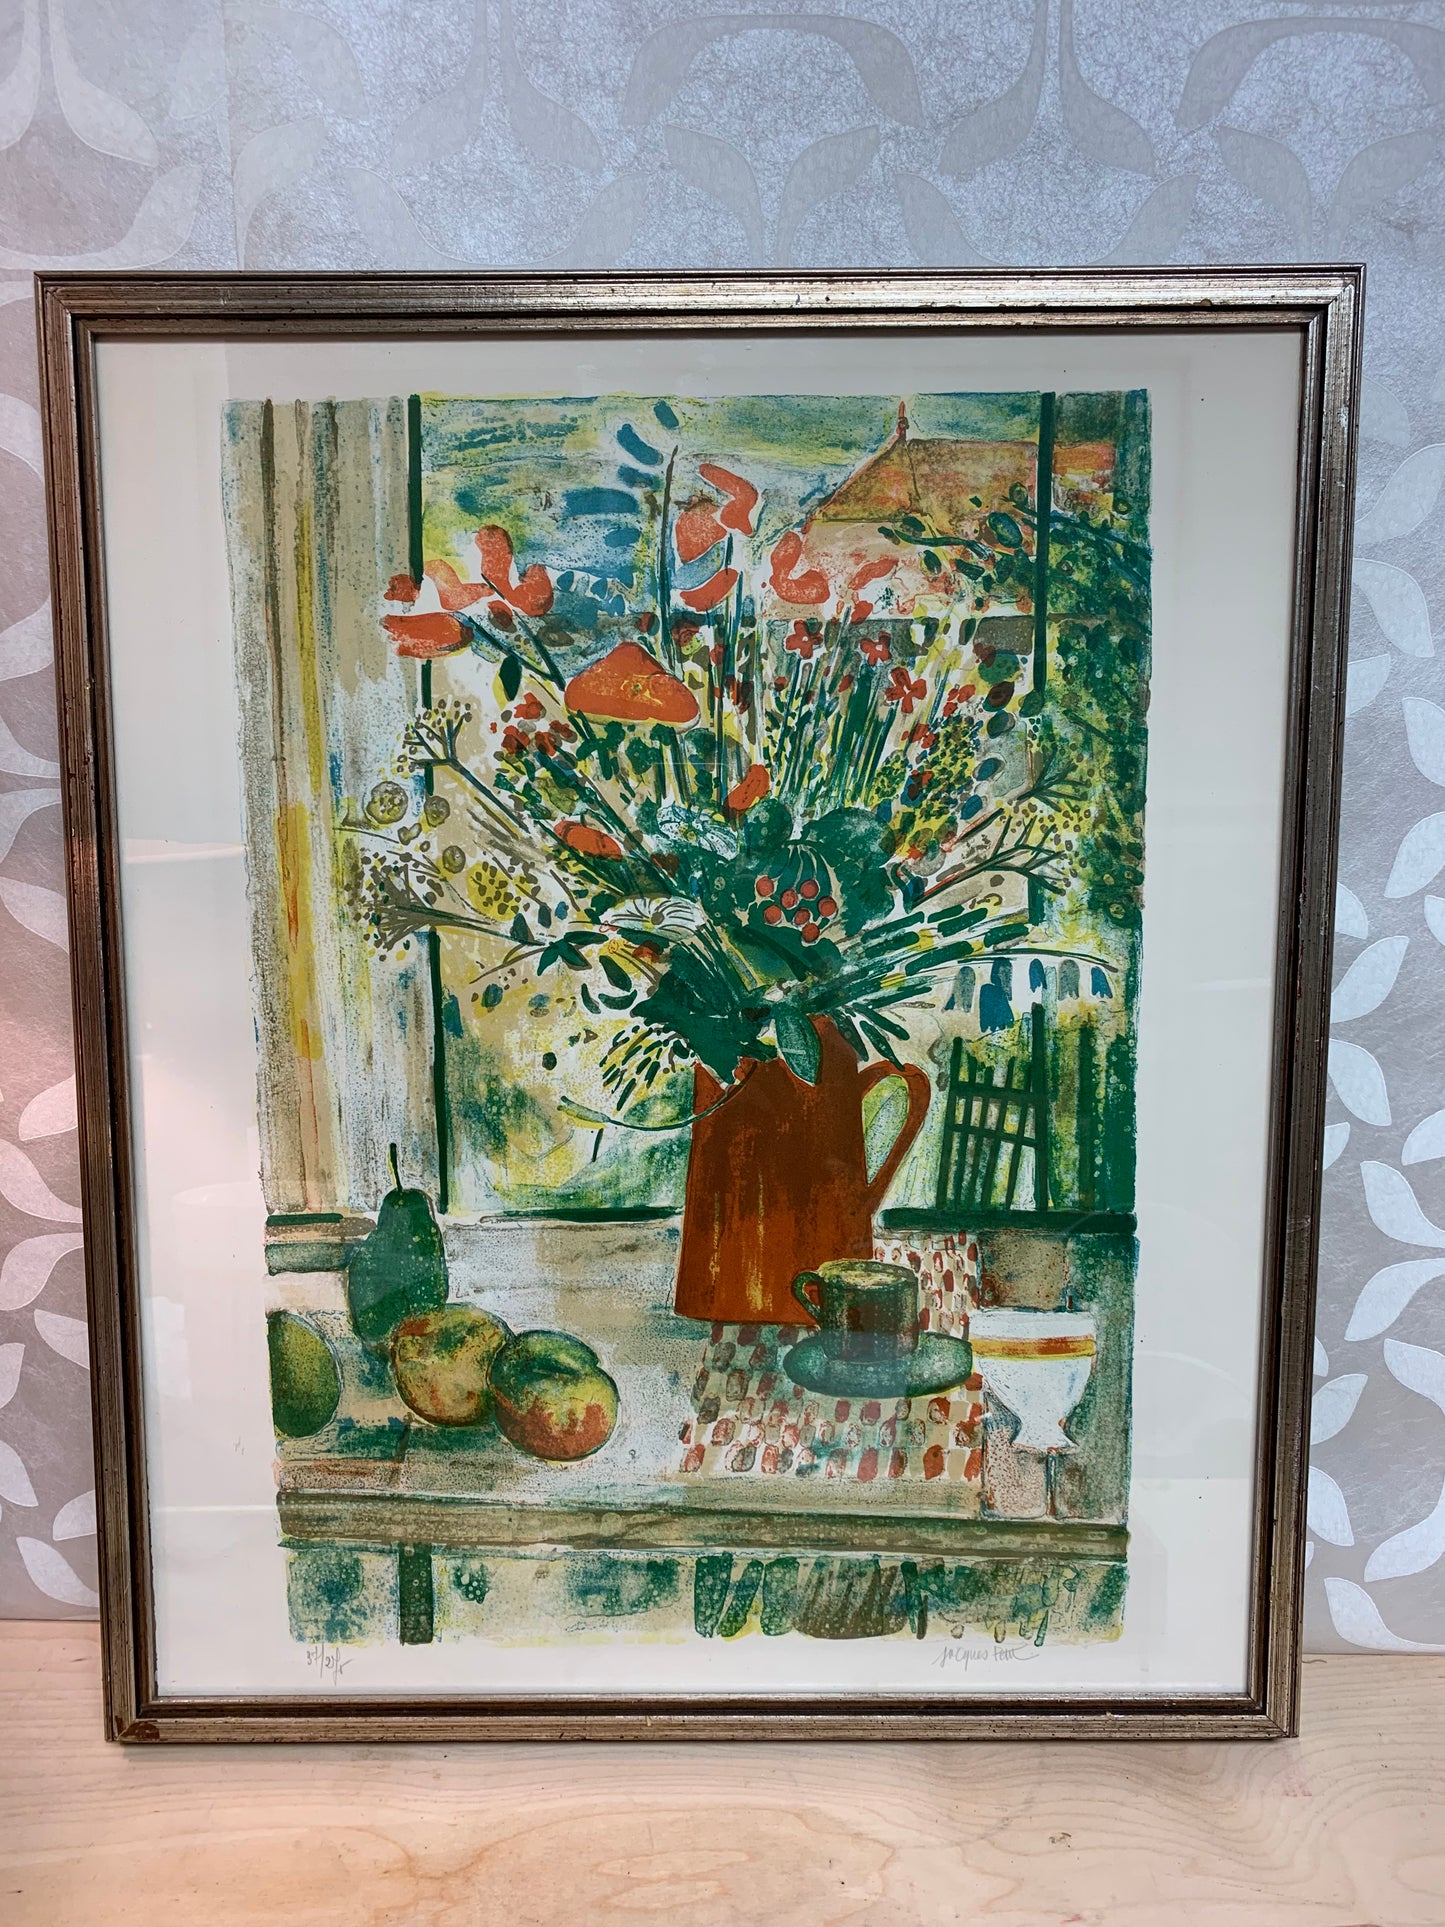 Art Work Vintage Jacques Petit Fleurs des champs Lithograph, DuBOSE Gallery Houston, Artist Signed and Numbered